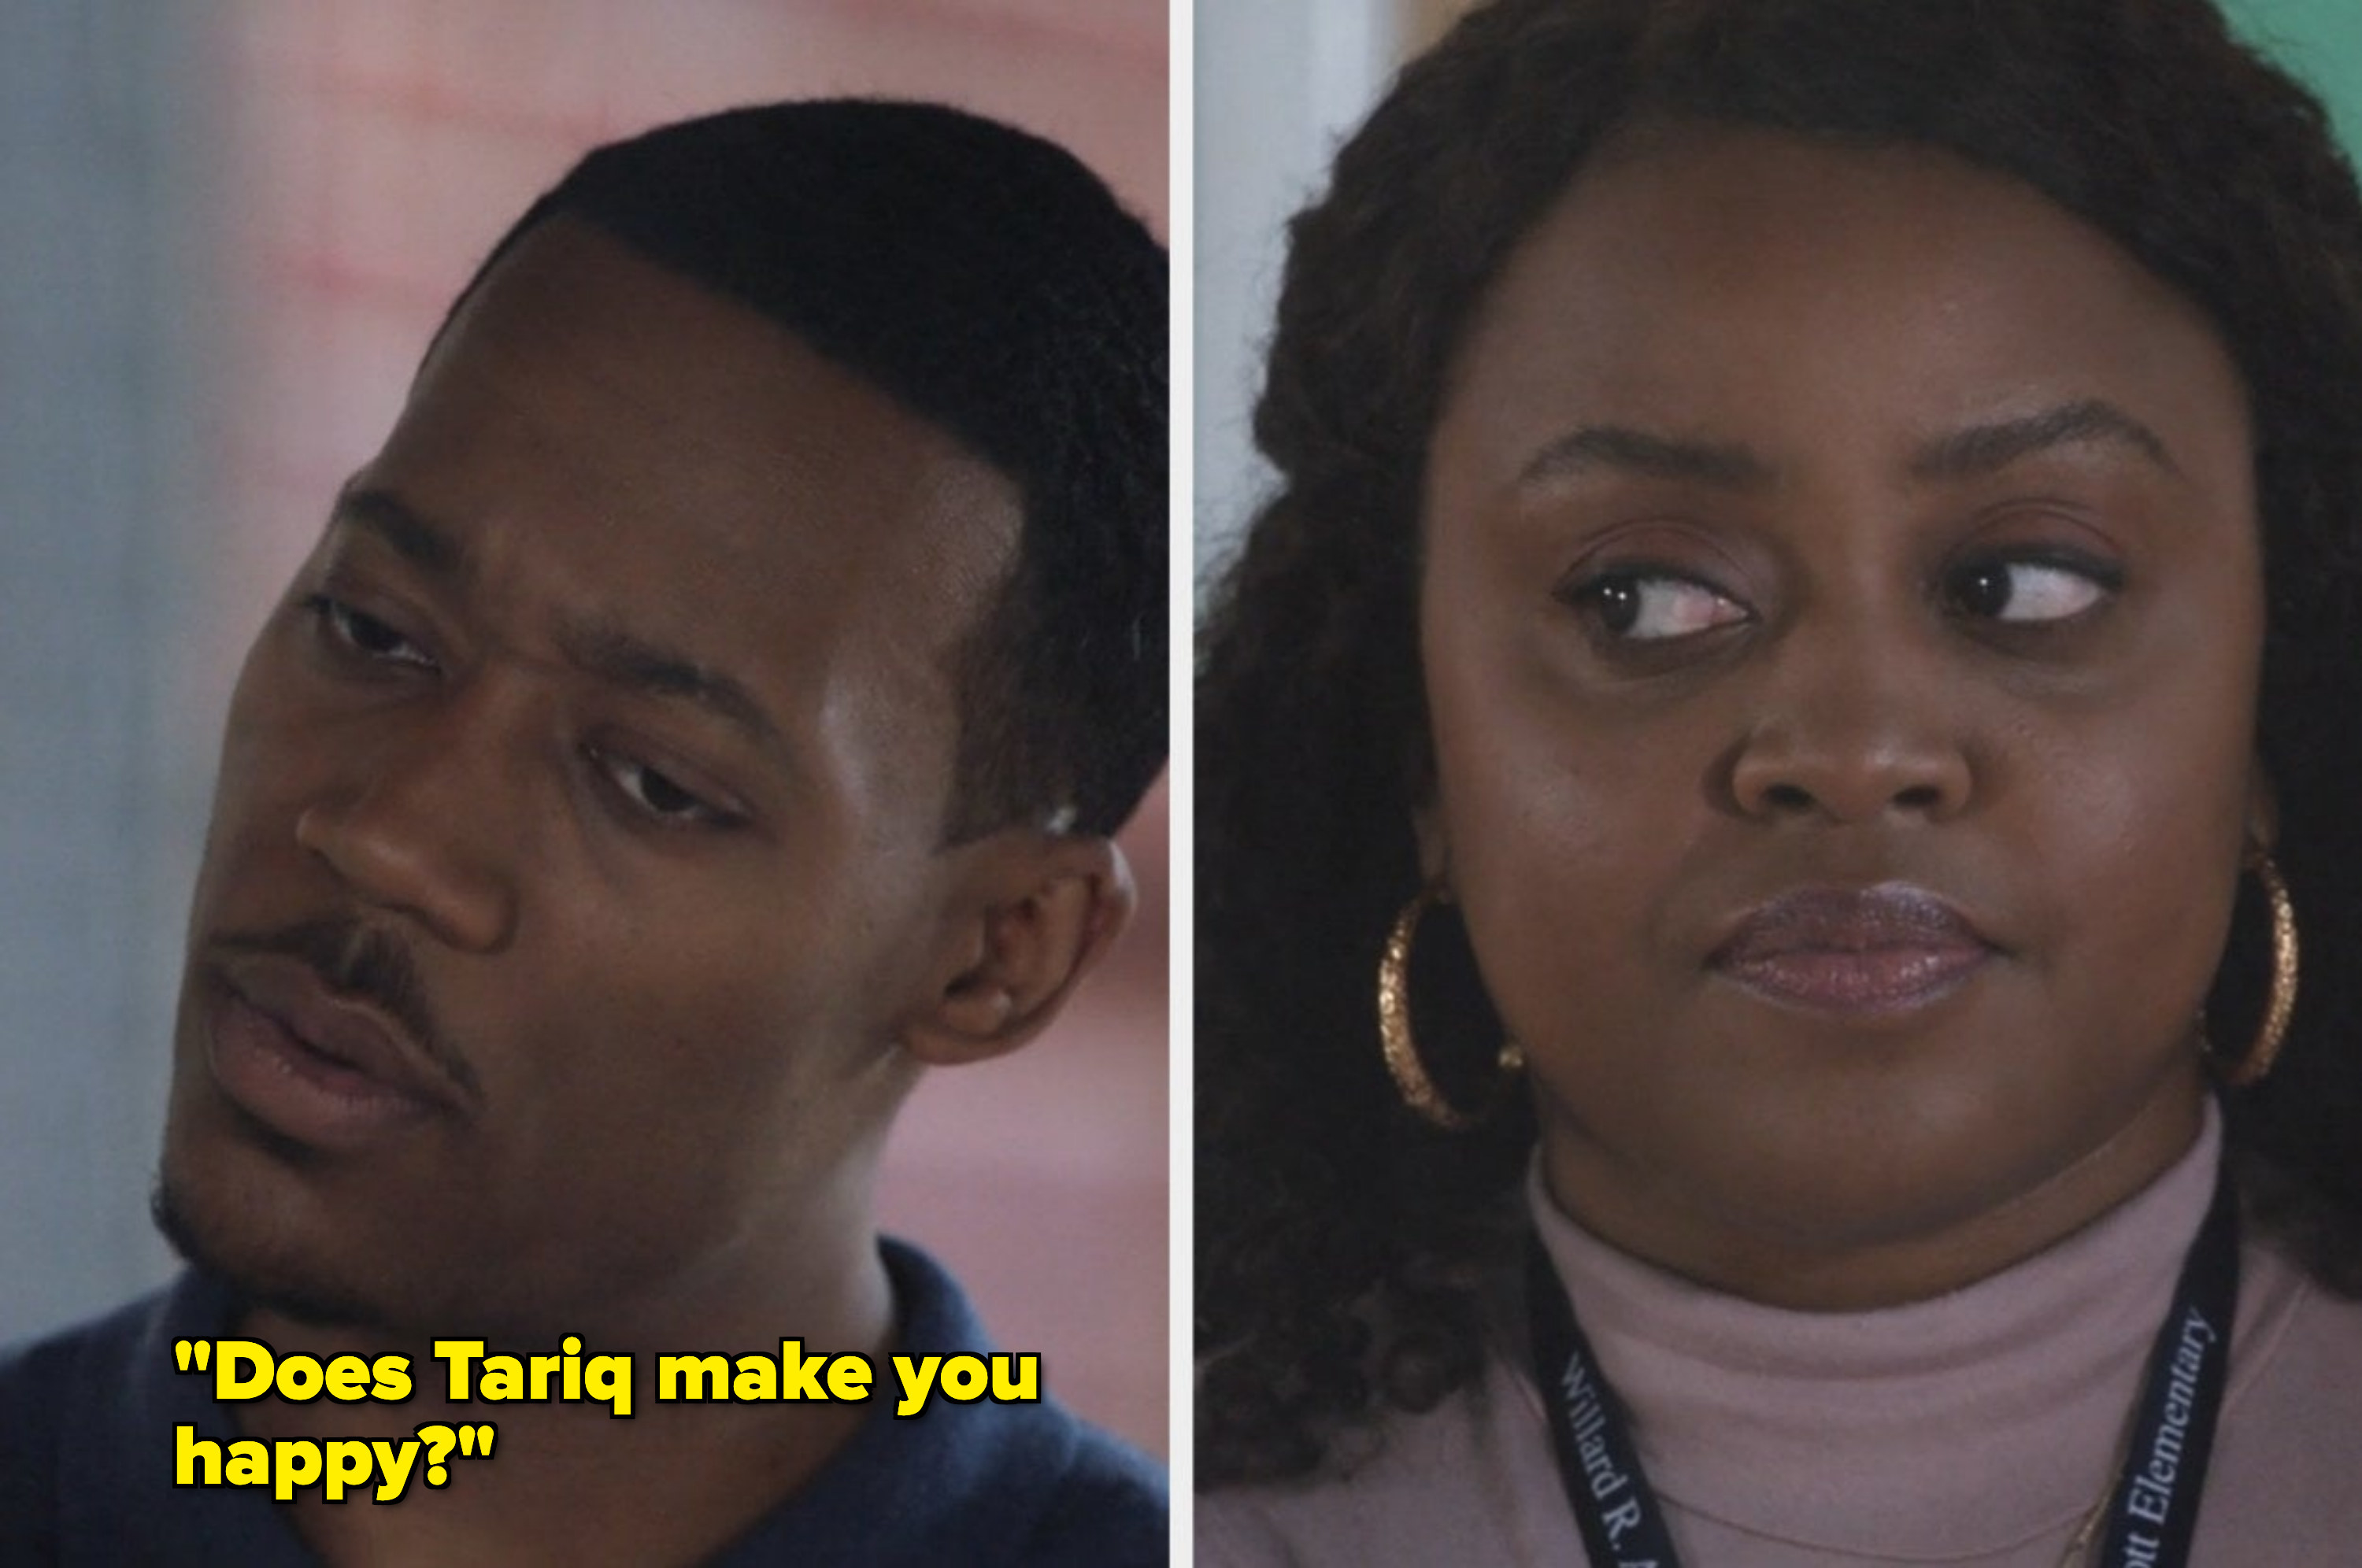 Gregory asks Janine if she is happy in her relationship with Tariq